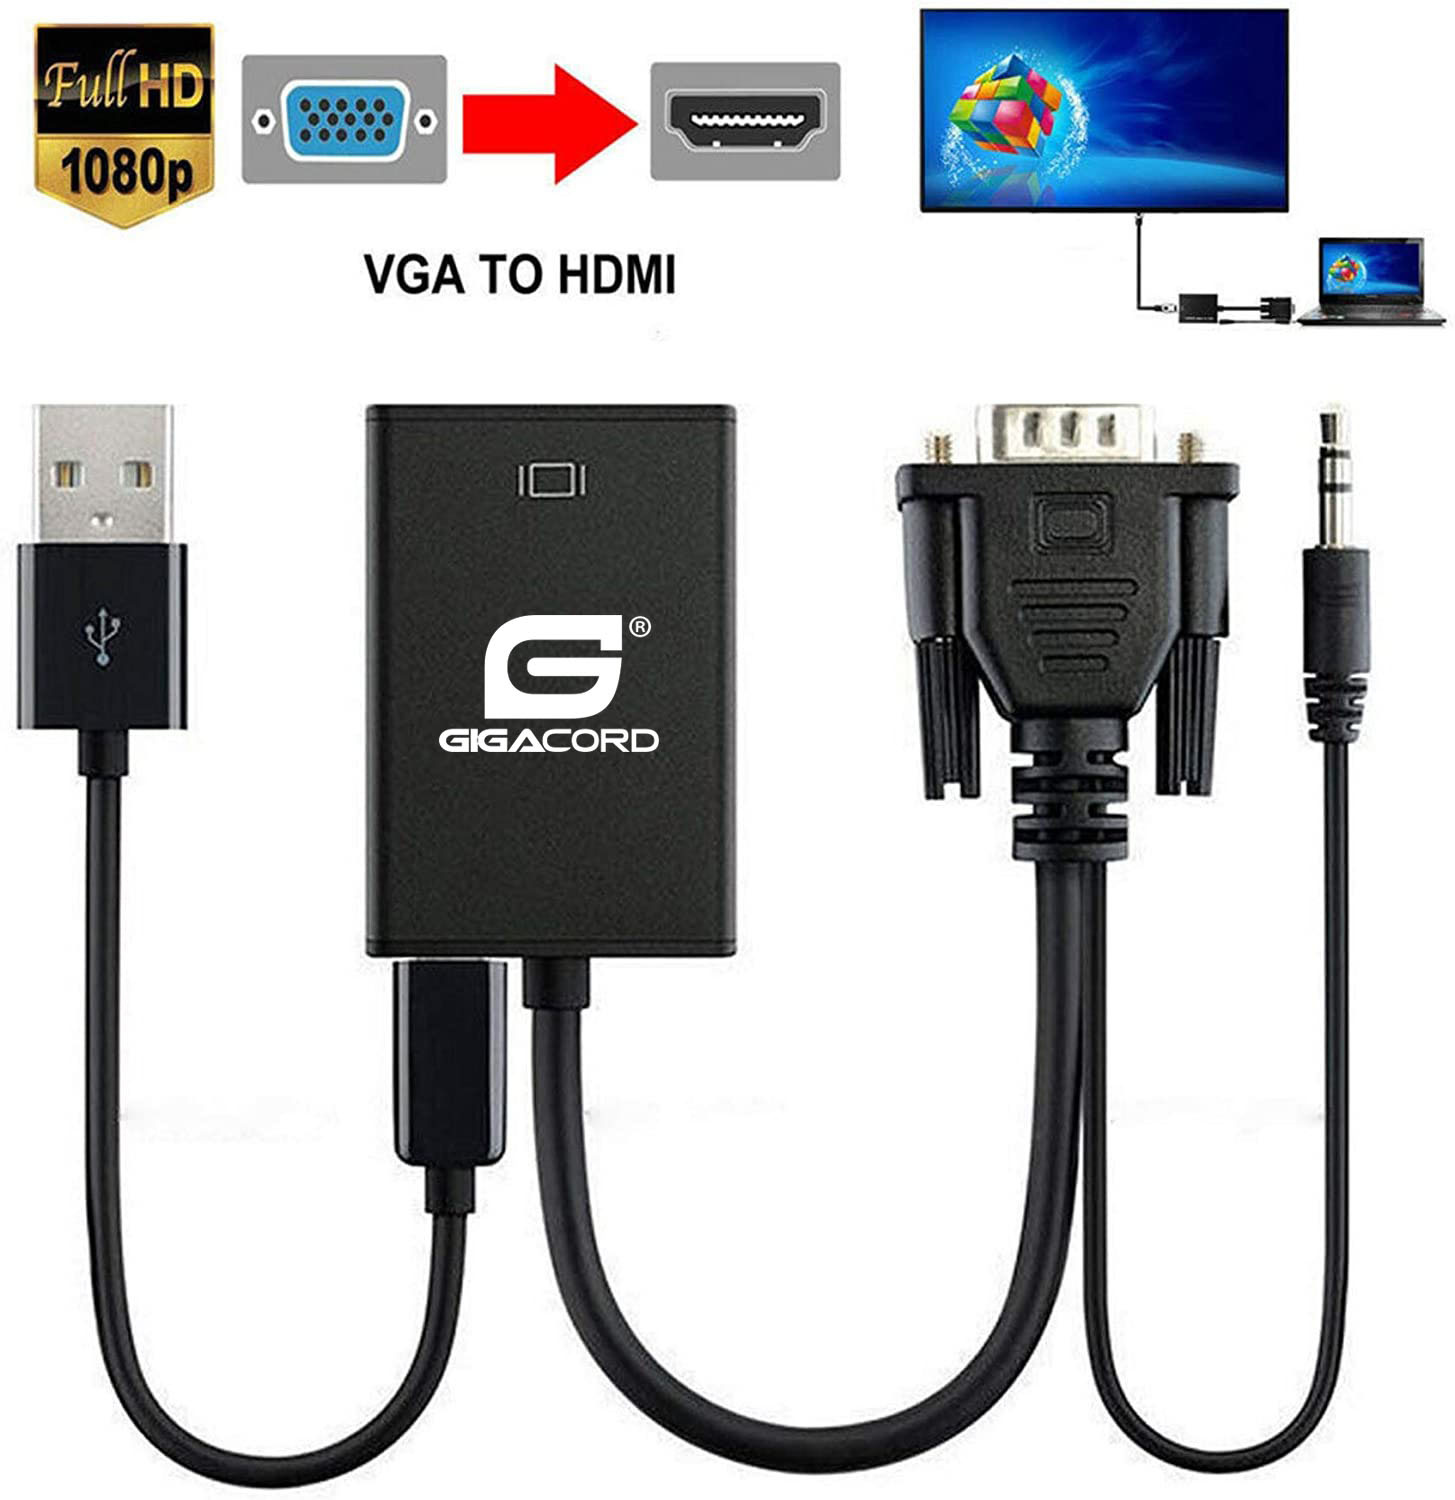 Gigacord 10 VGA Male to HDMI Female Converter Adapter with 3.5mm Audio and USB Power Adapter (Choose color)